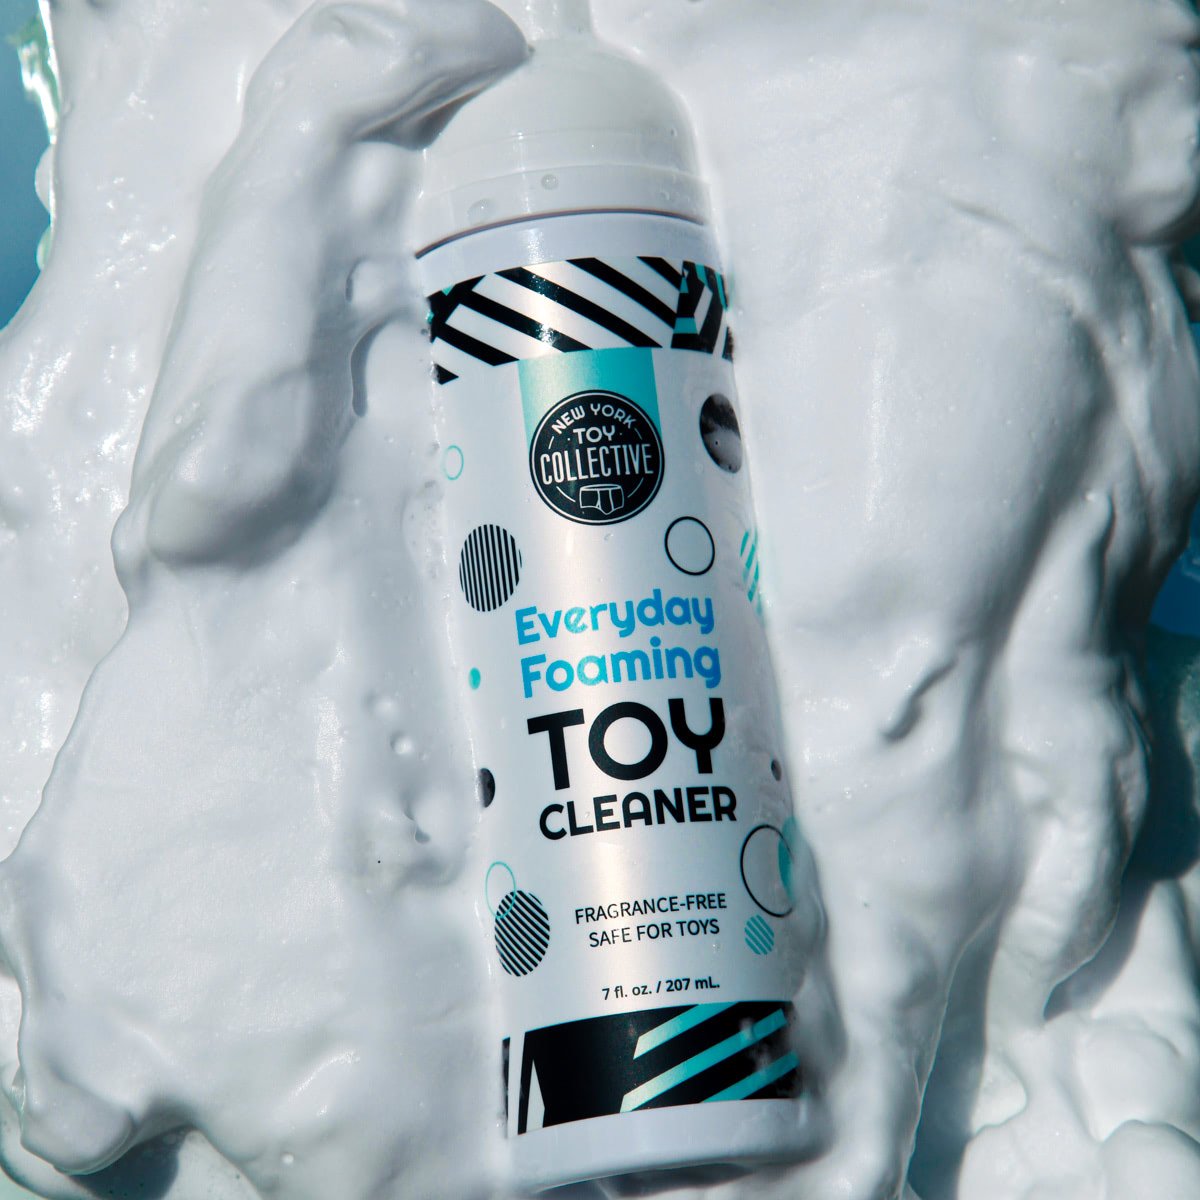 Foaming toy cleaner by New York Toy Collective